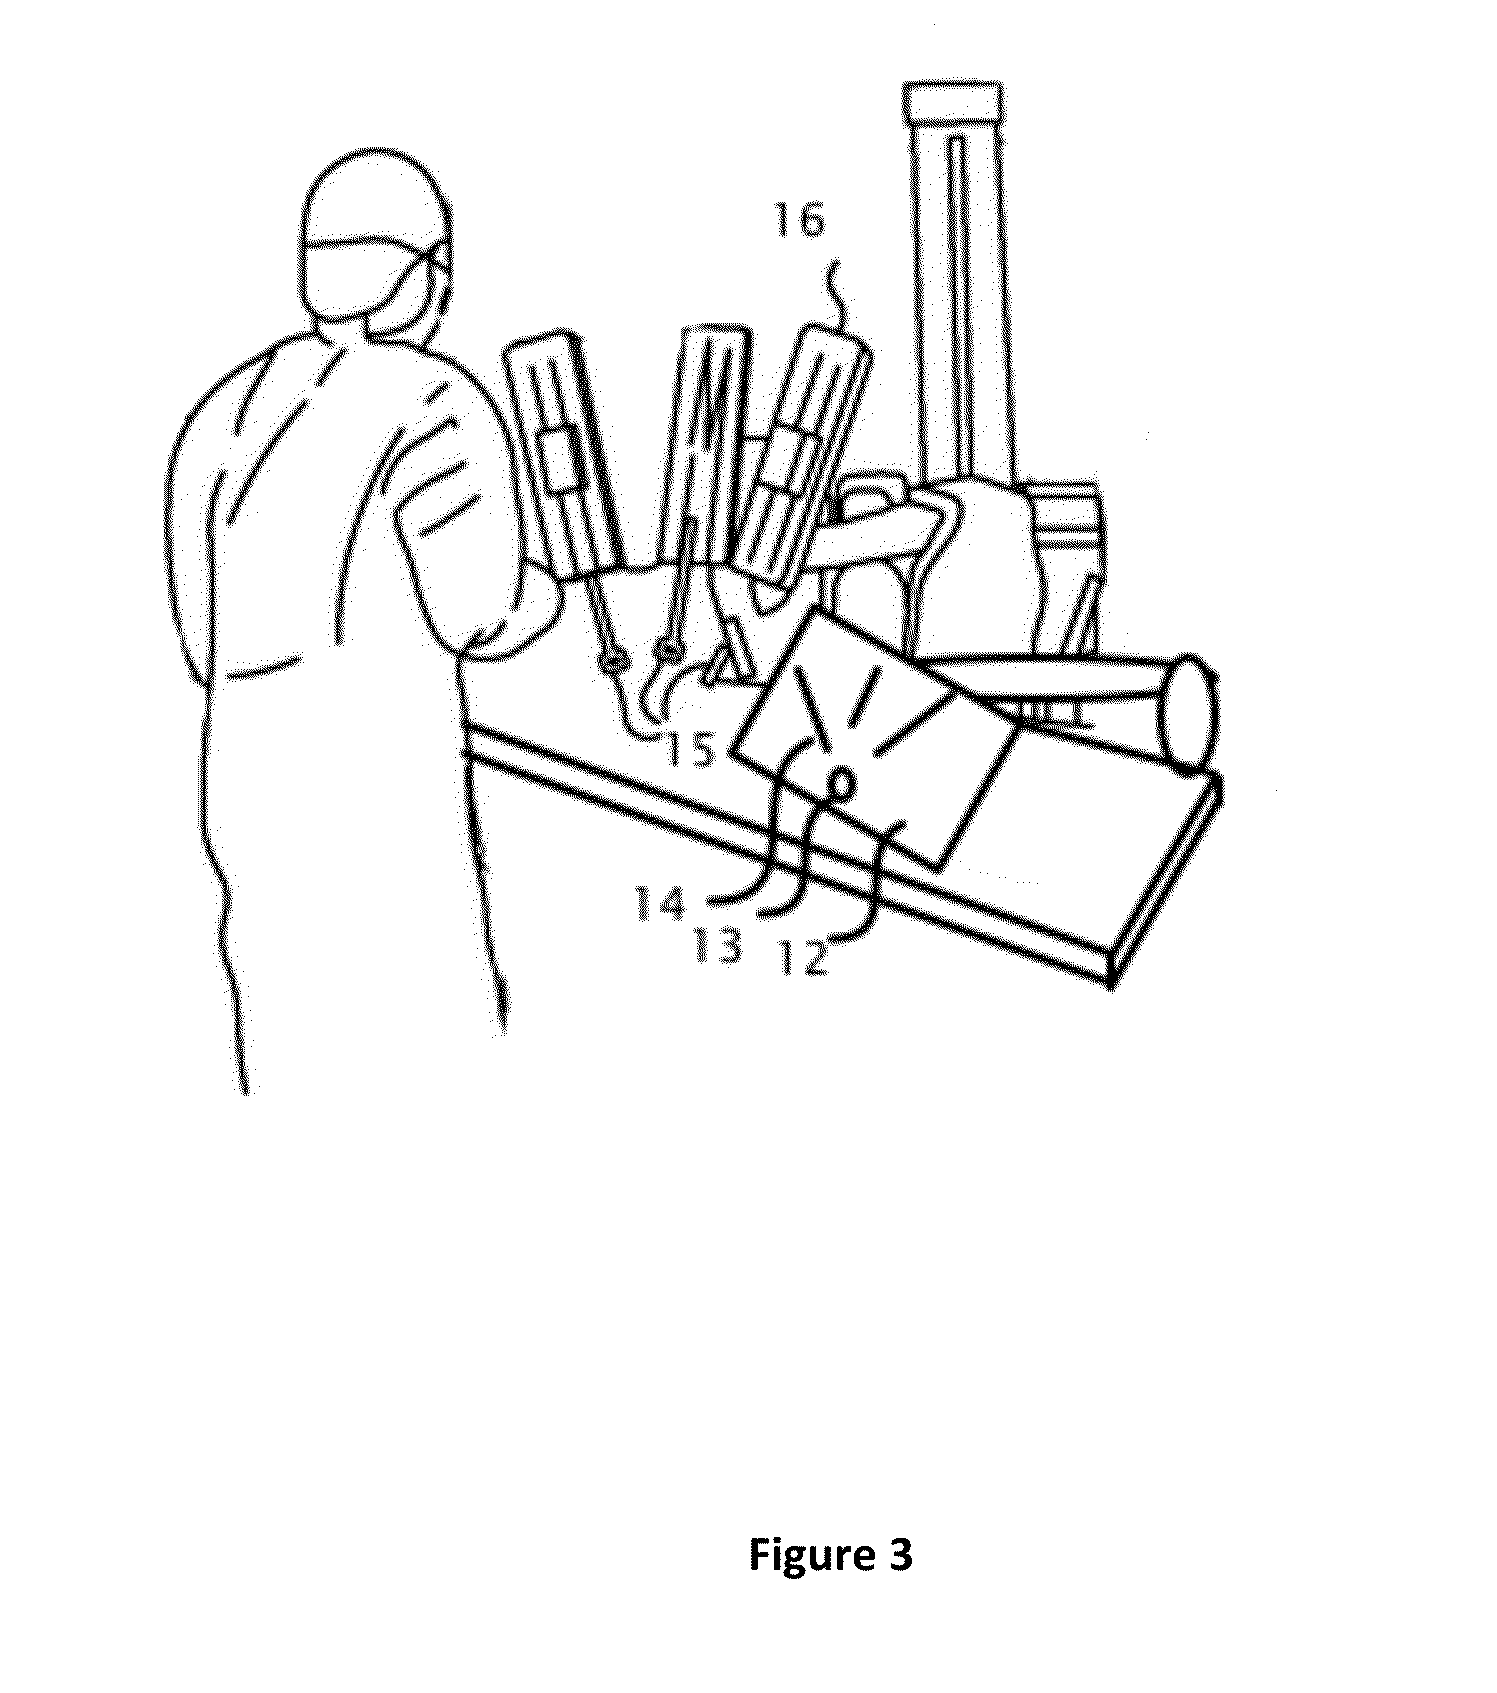 System and method for displaying anatomy and devices on a movable display